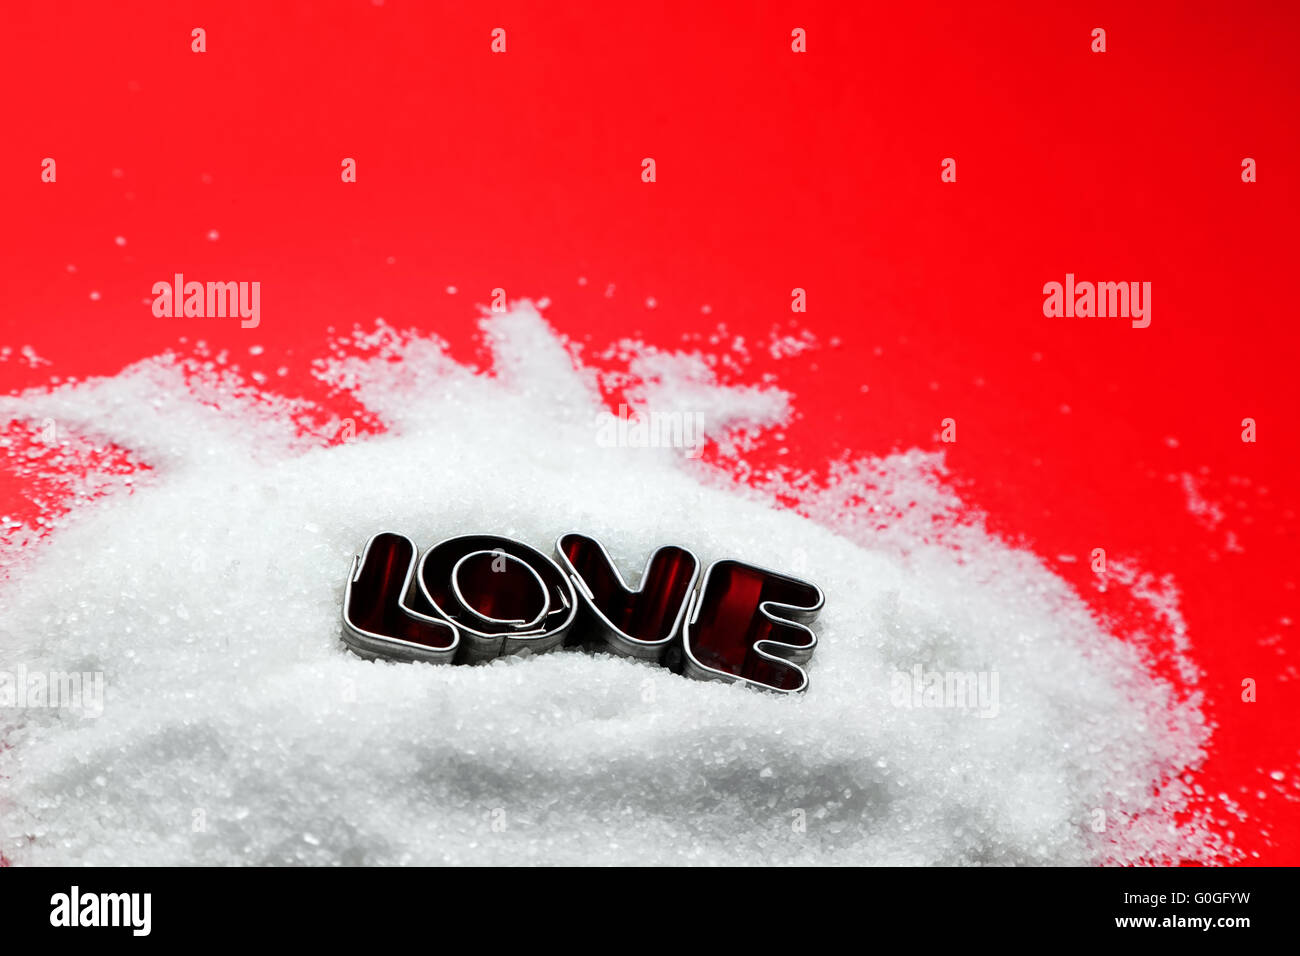 https://c8.alamy.com/comp/G0GFYW/love-text-message-from-cookie-form-letters-on-sugar-and-red-background-G0GFYW.jpg